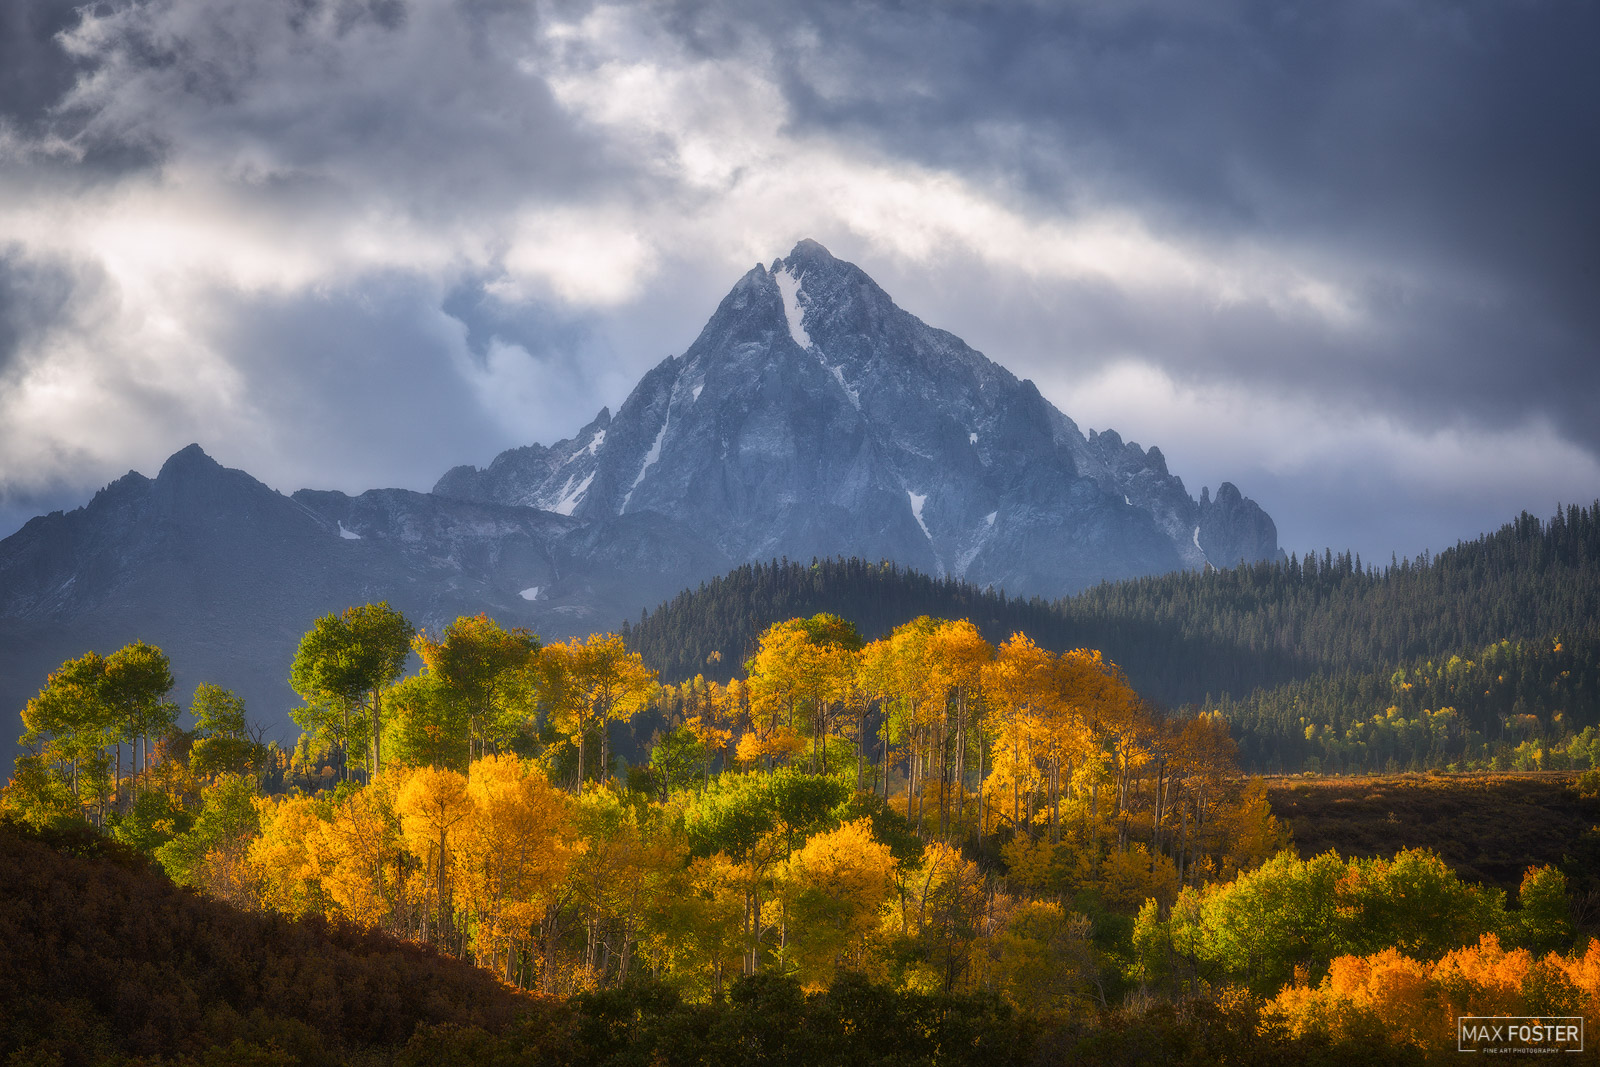 Breathe new life into your home with Opposing Forces, Max Foster's limited edition photography print of Mount Sneffels in the...